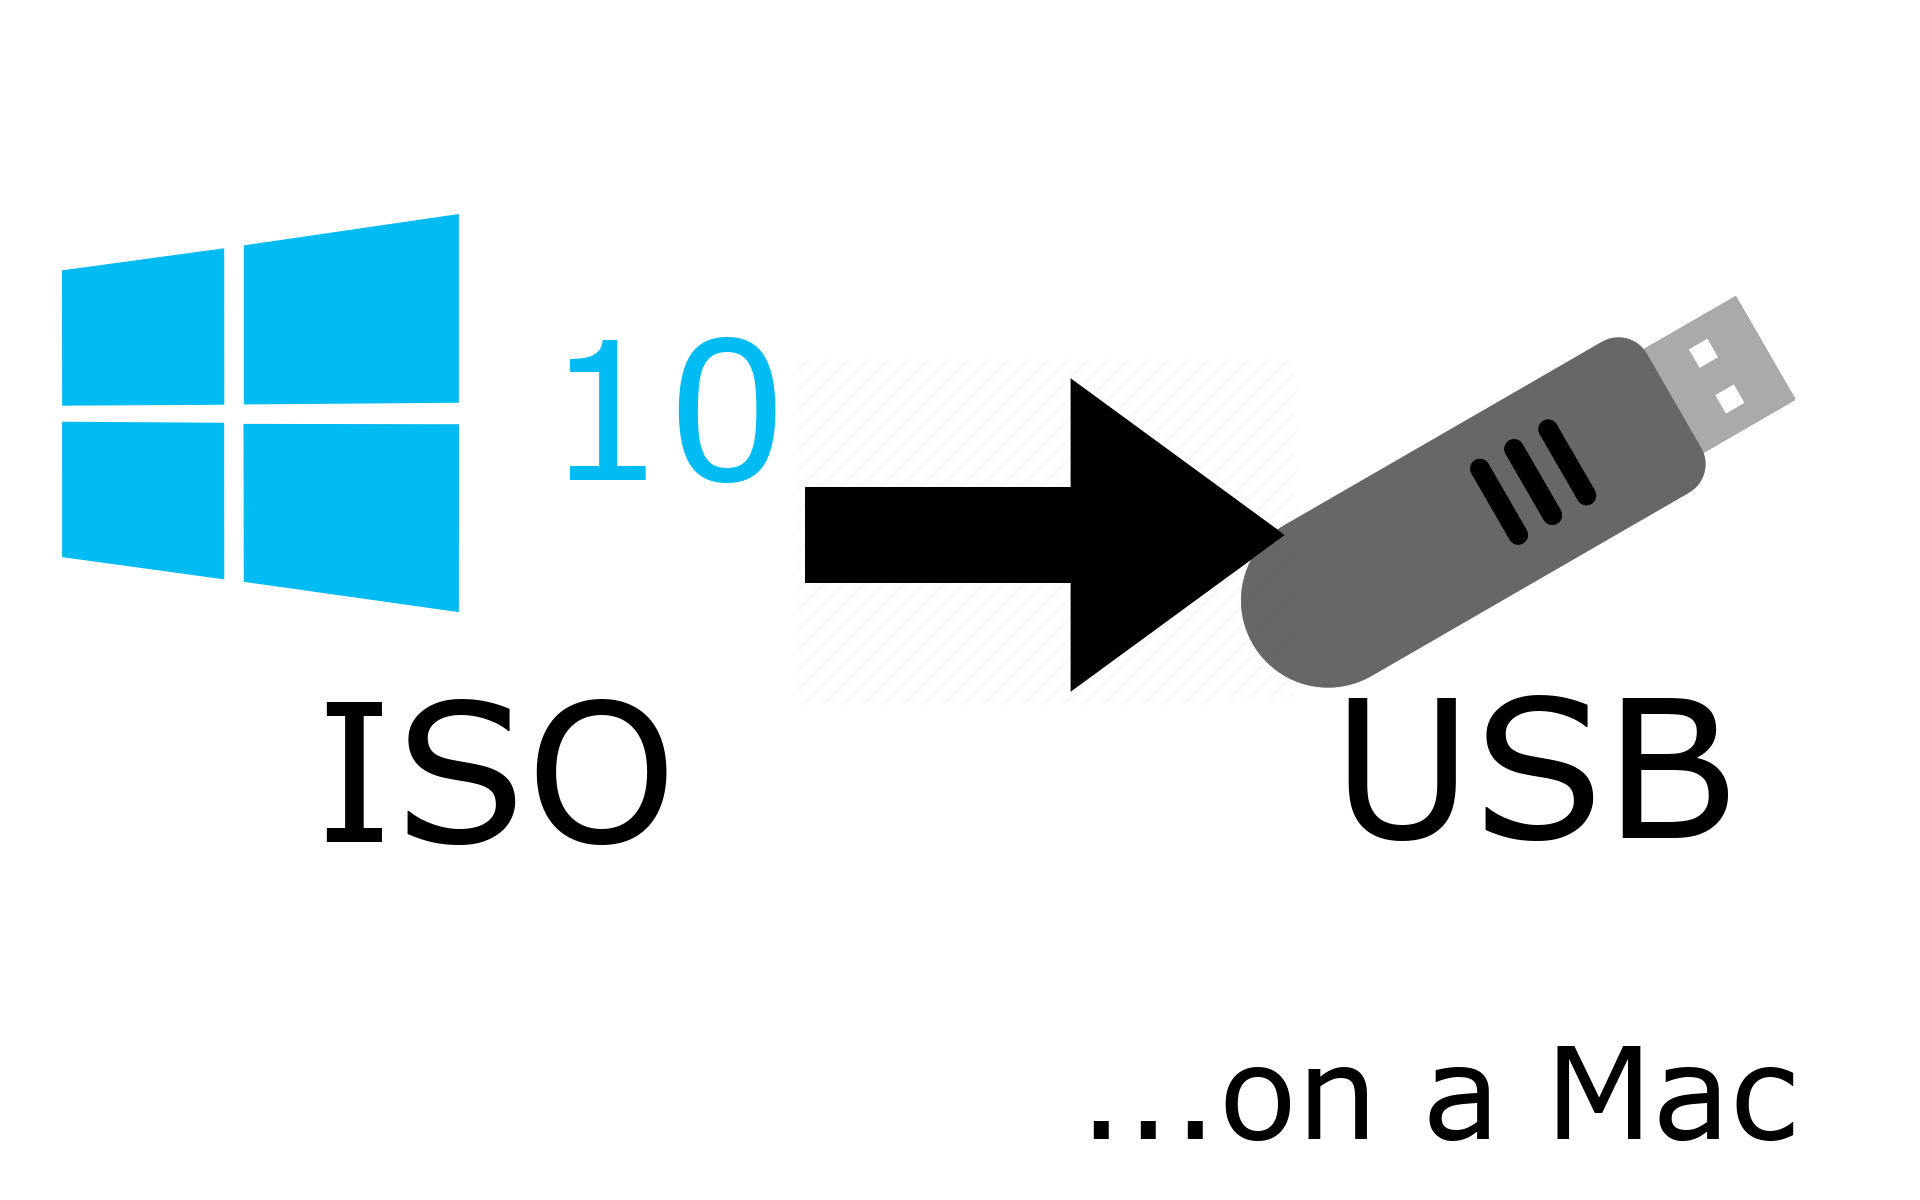 a bootable Windows 10 USB drive from a — Alex Lubbock